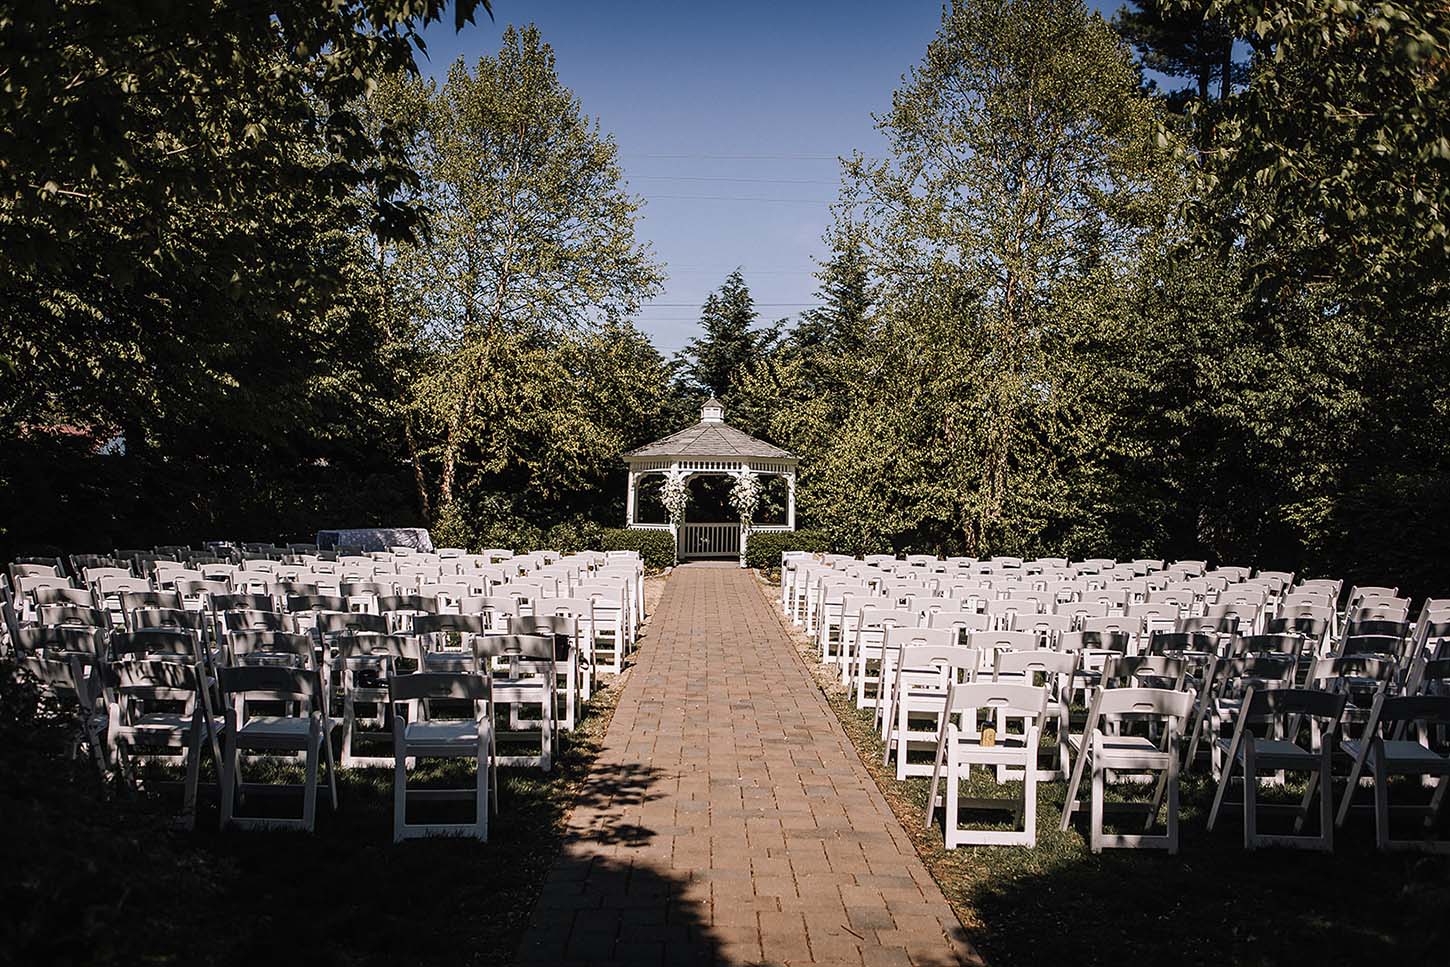 Looking down the main aisle of an outdoor wedding towards the wedding altar before the guests arrive. Photo by Kristy Hoadley Photography.